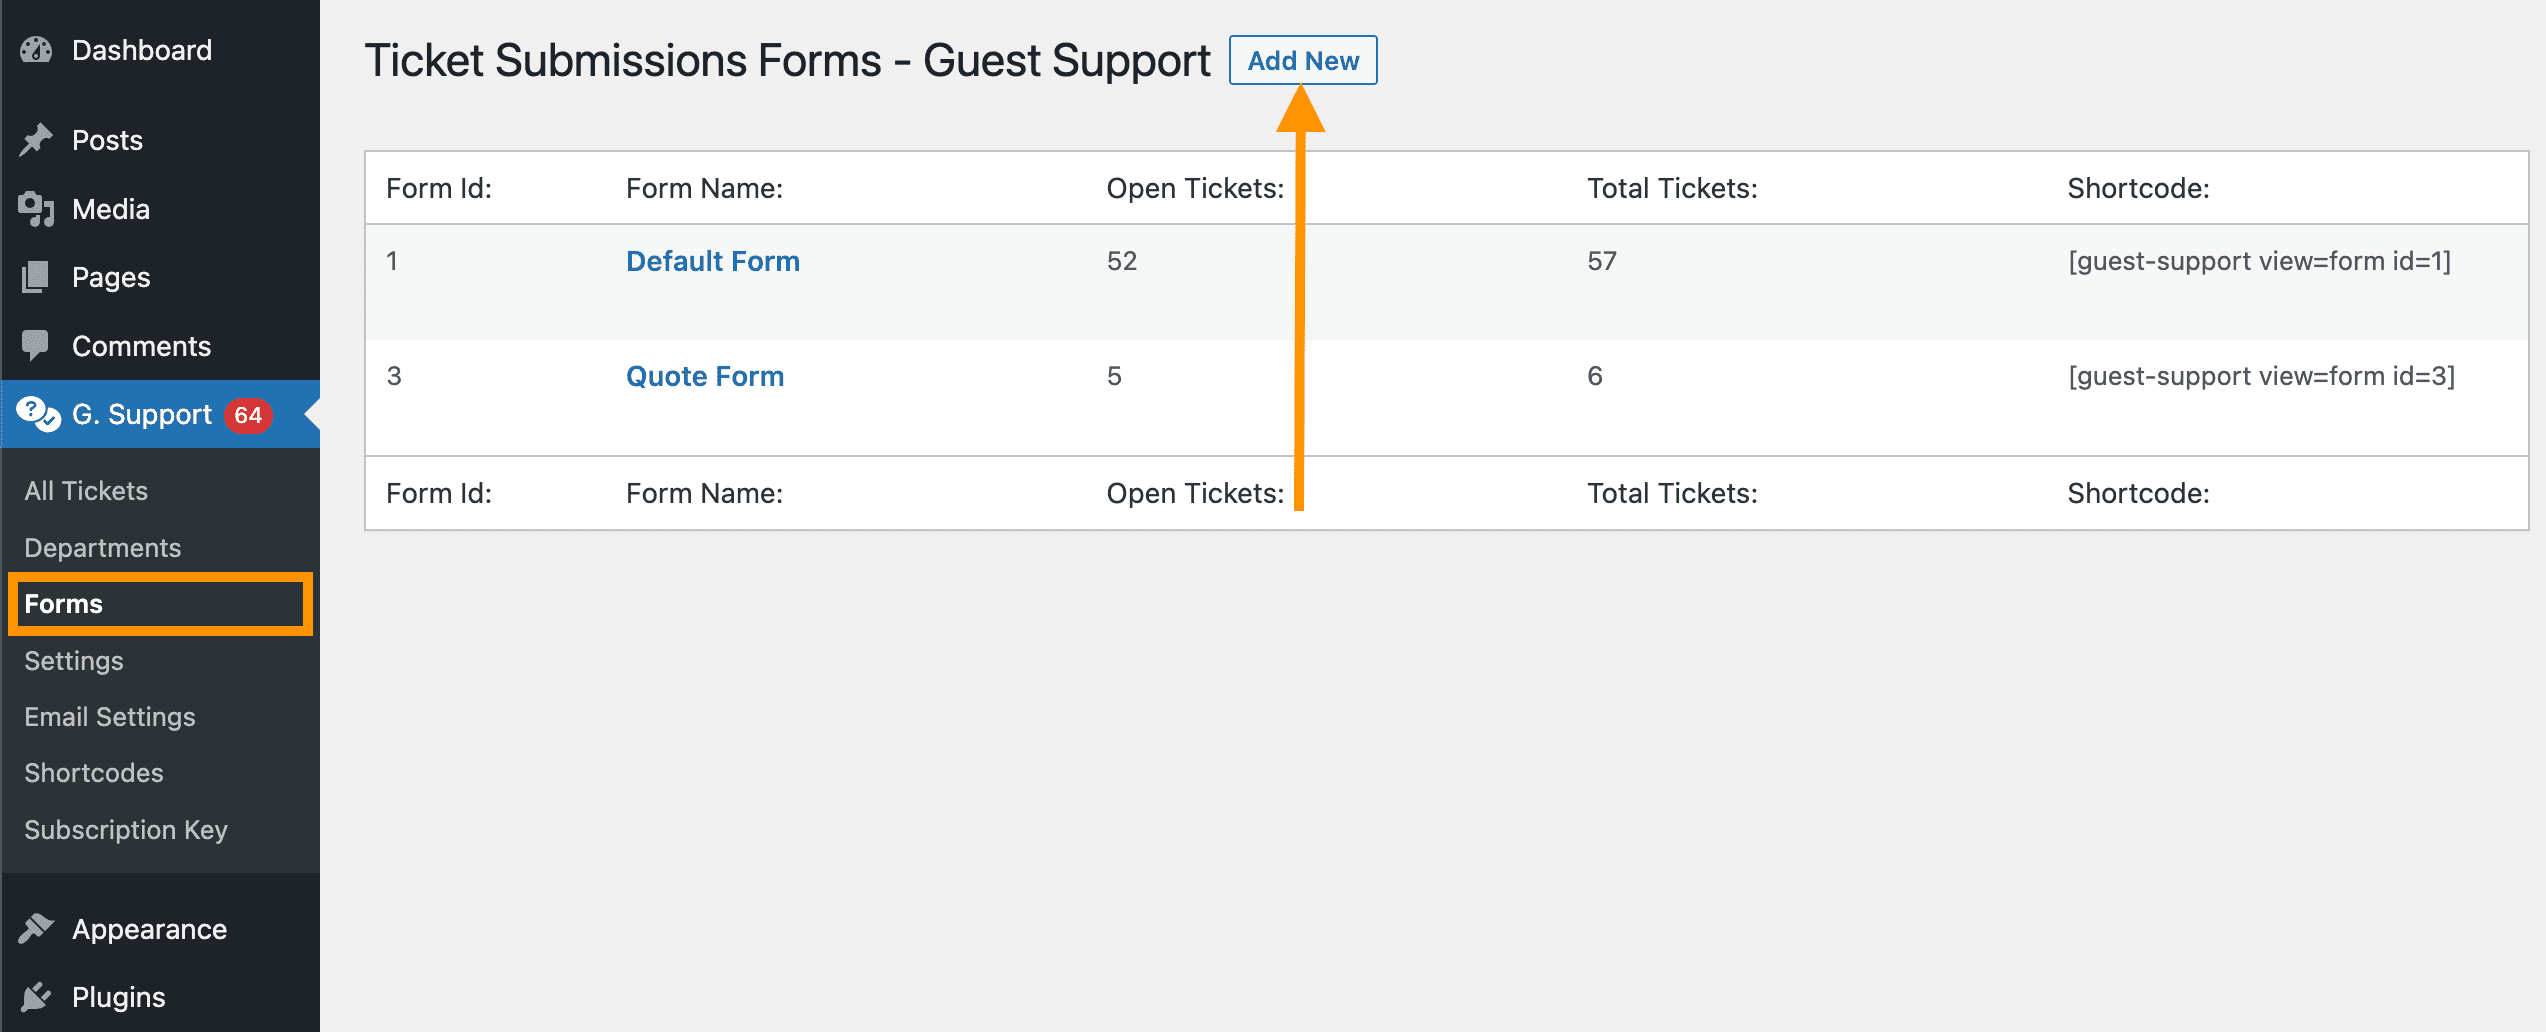 Guest support - Add new form